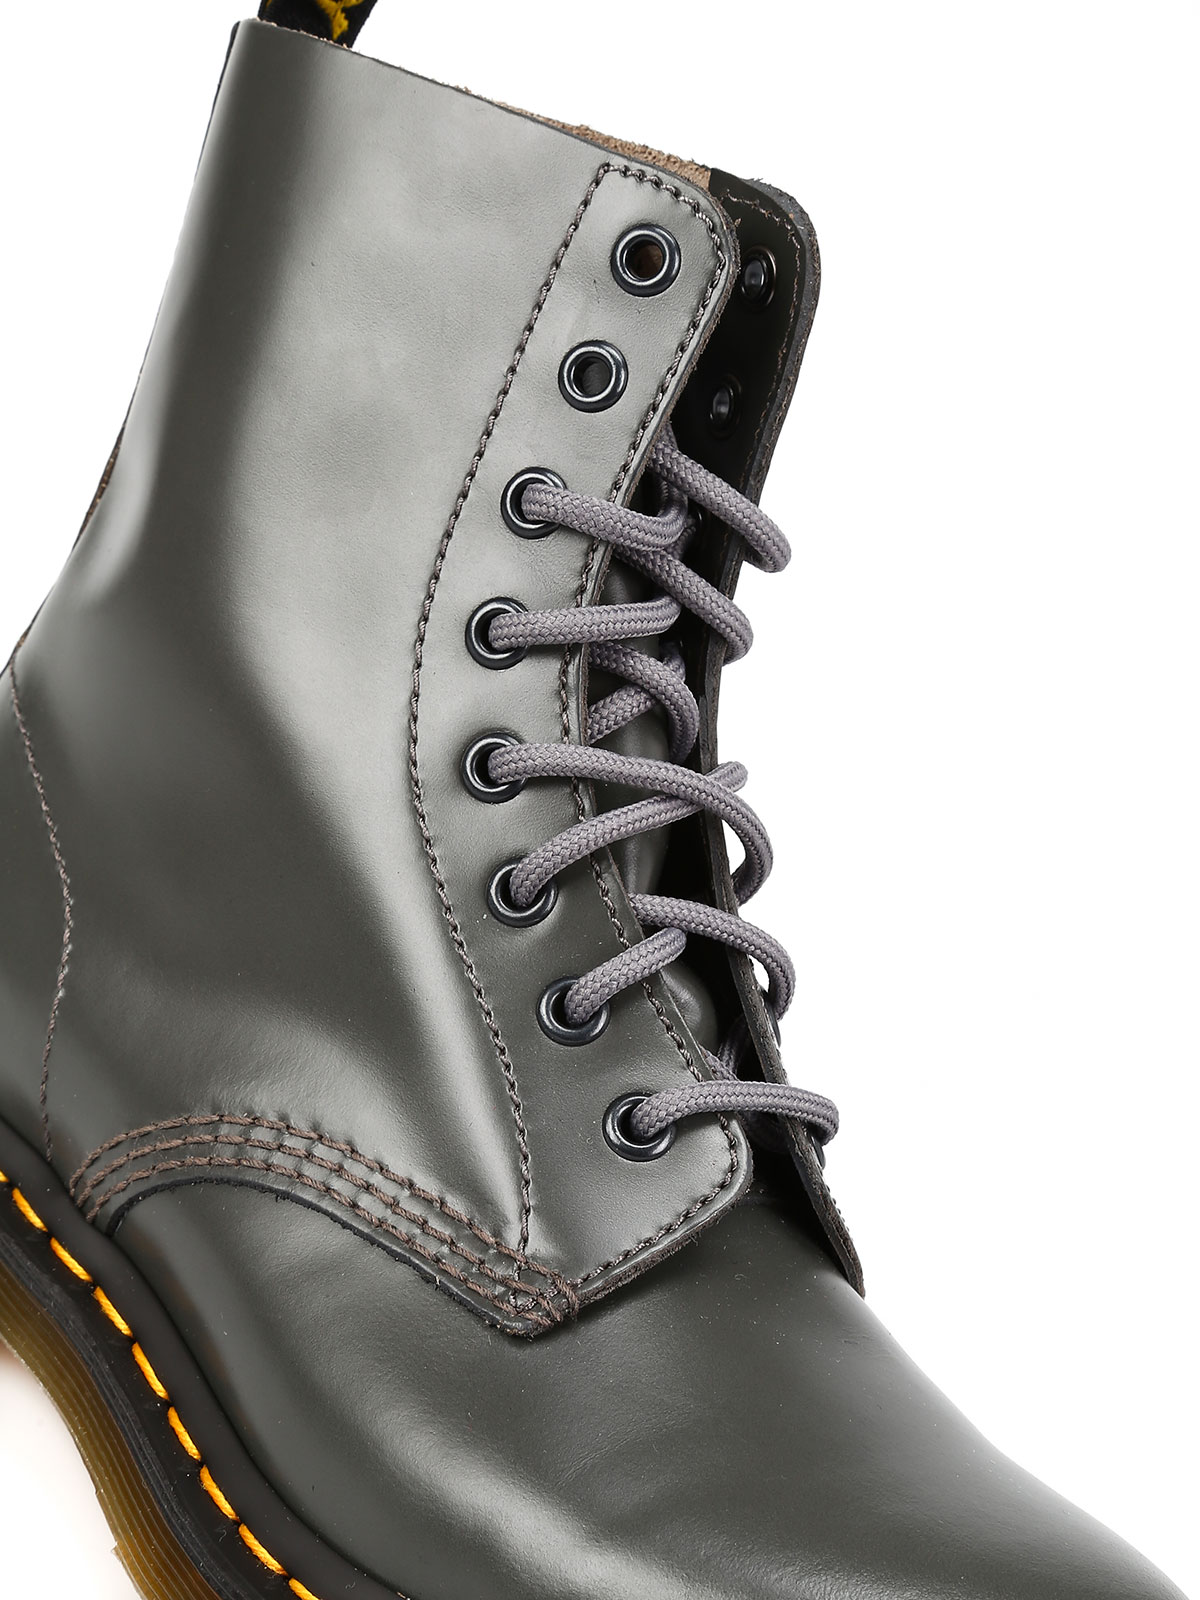 fiets verwarring Kwestie Ankle boots Dr. Martens - Pascal buttero - PASCALGREY | iKRIX.com